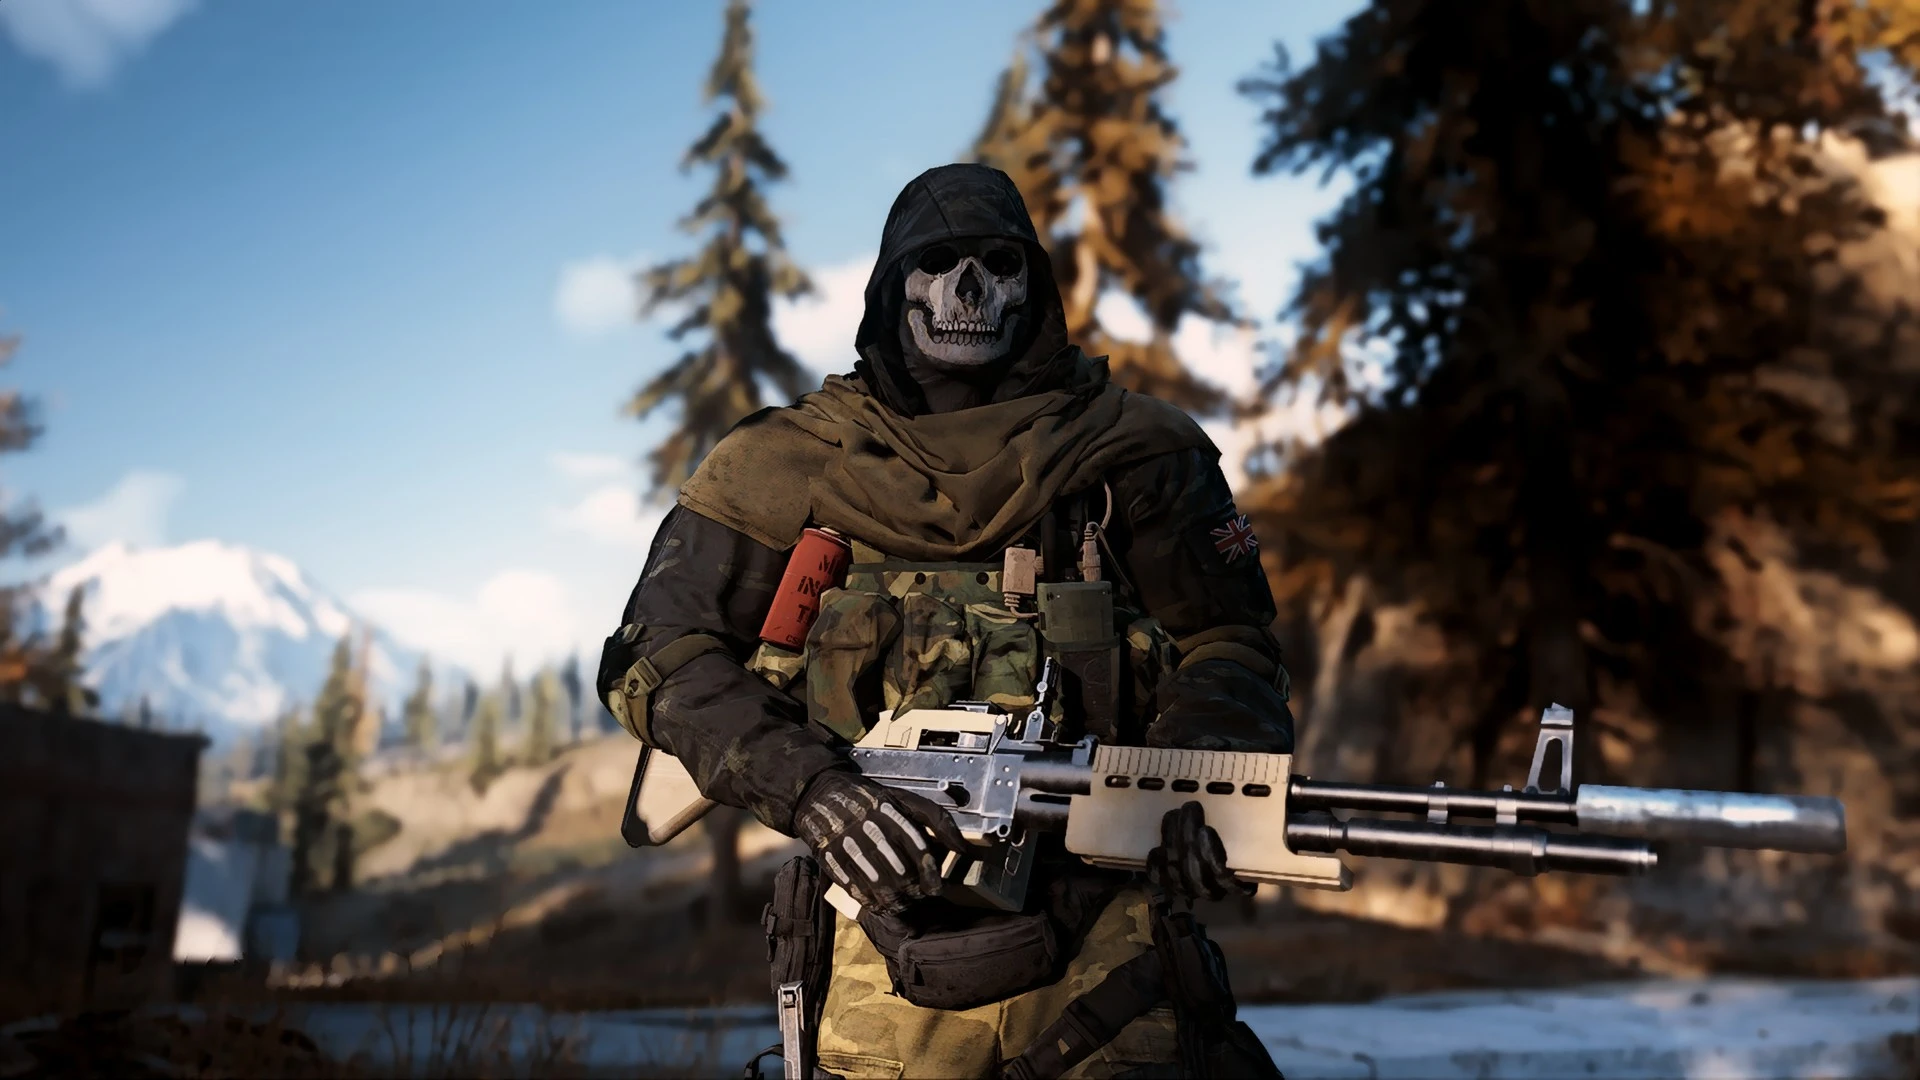 Undead Freaker at Days Gone Nexus - Mods and community